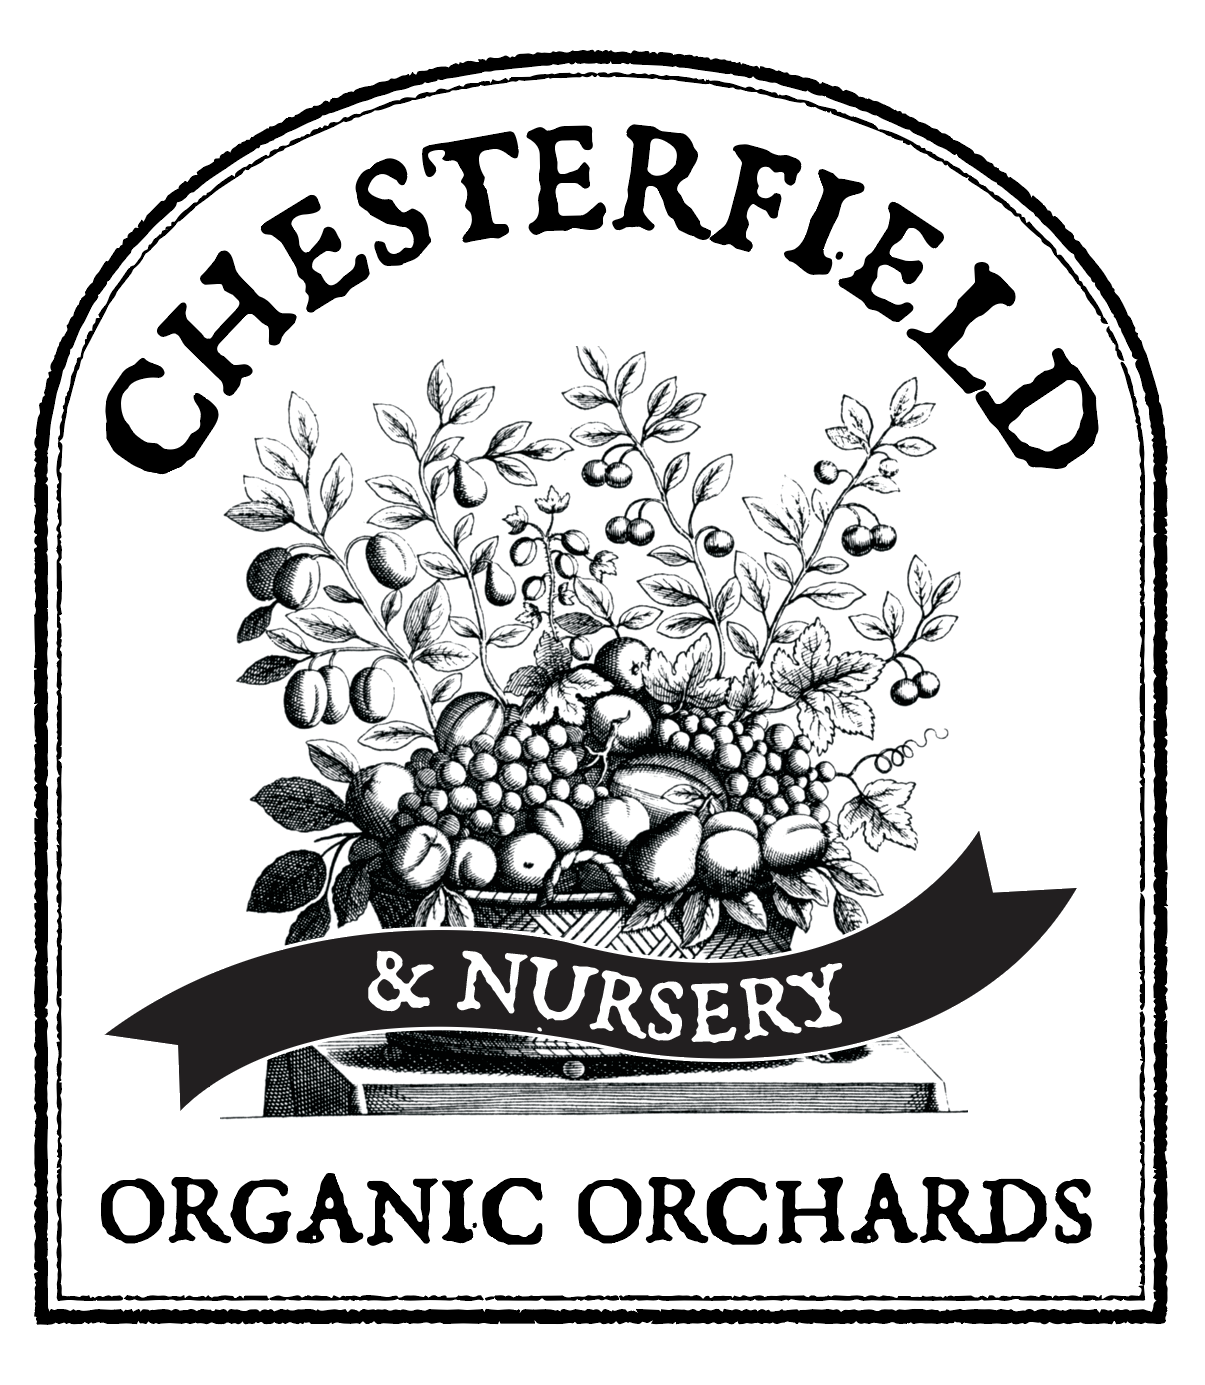 CHESTERFIELD ORGANIC ORCHARDS